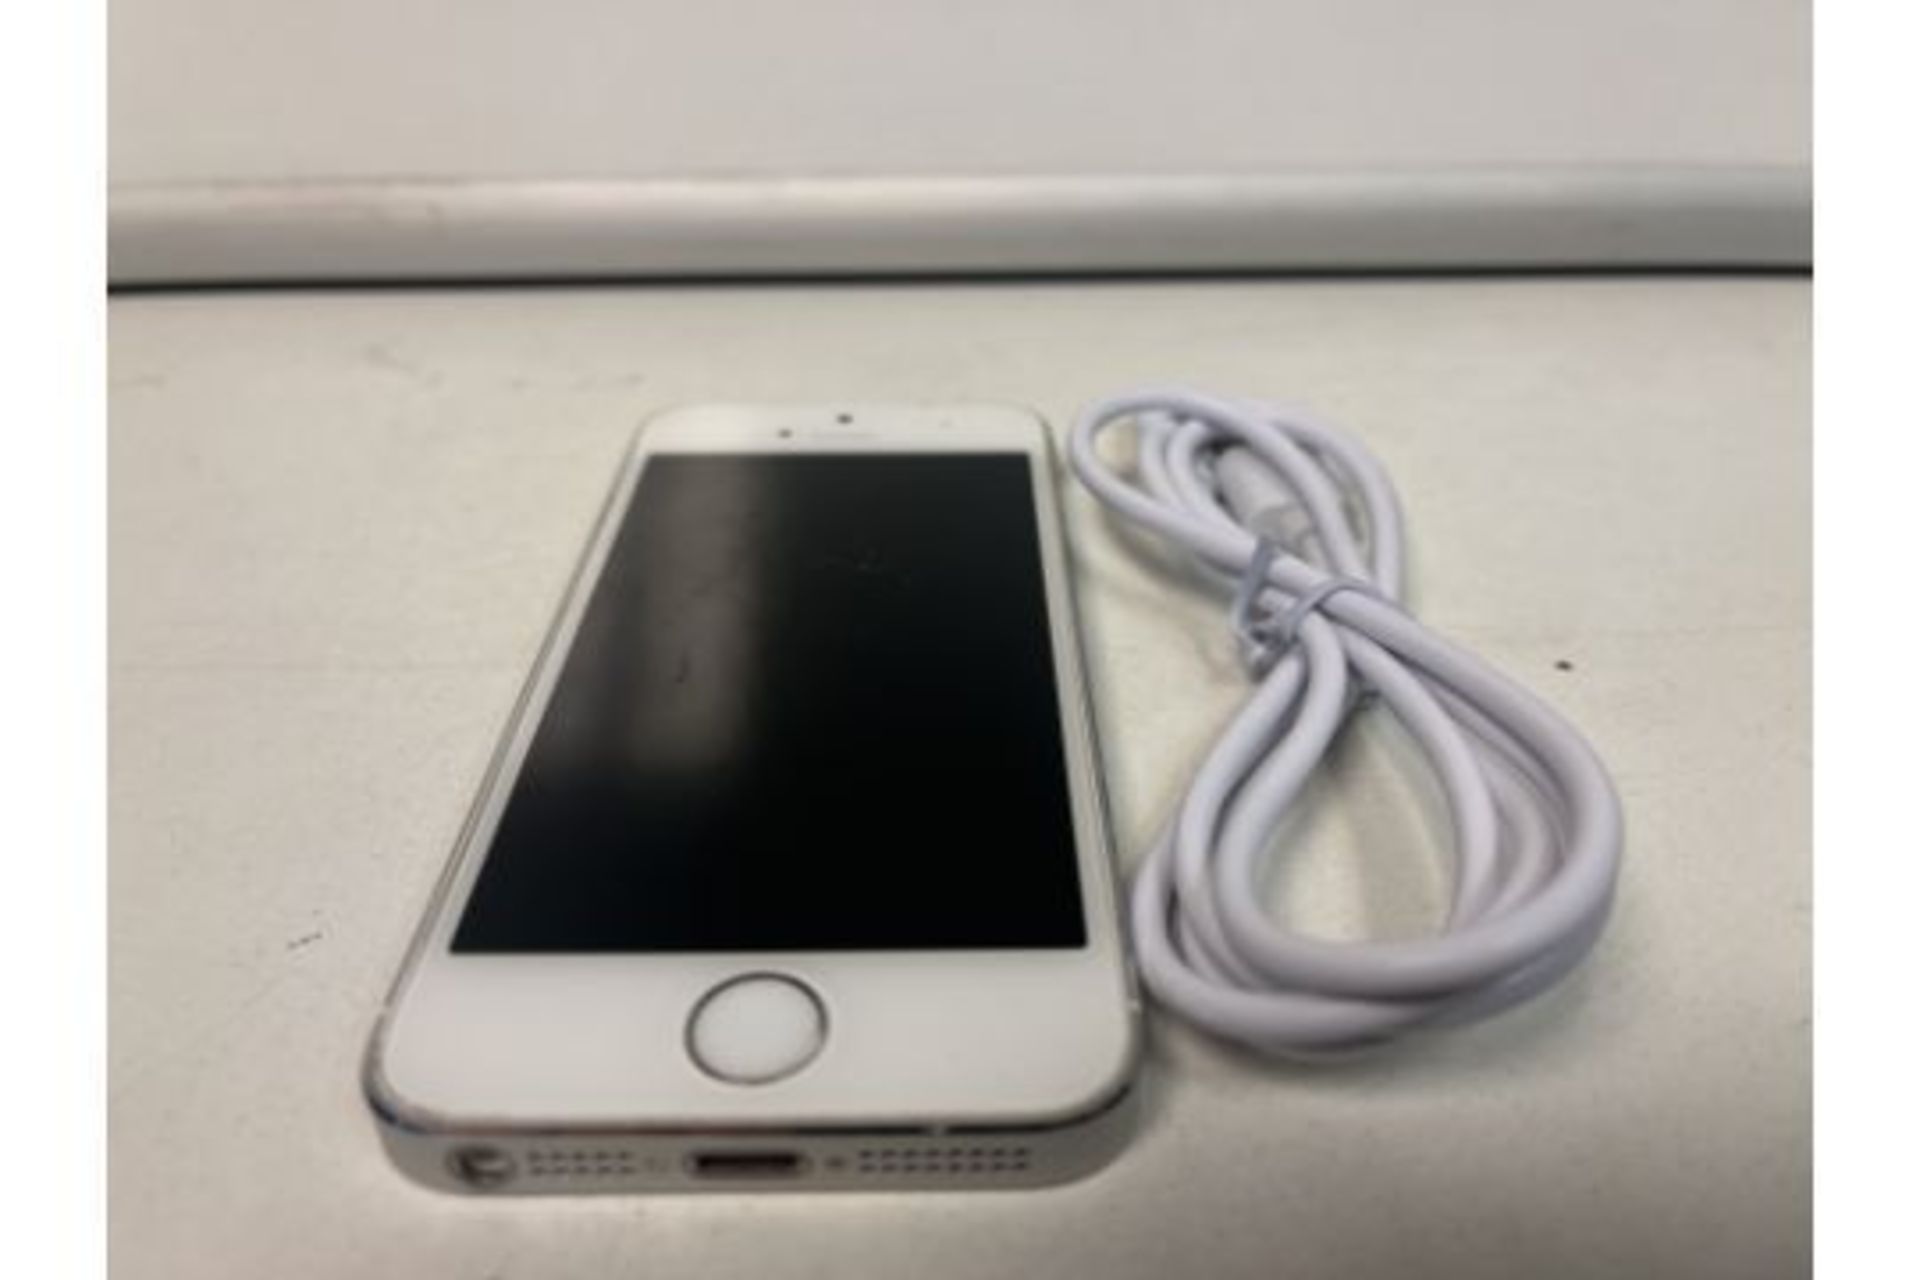 APPLE IPHONE, 16GB STORAGE WITH CHARGE CABLE (78) 198